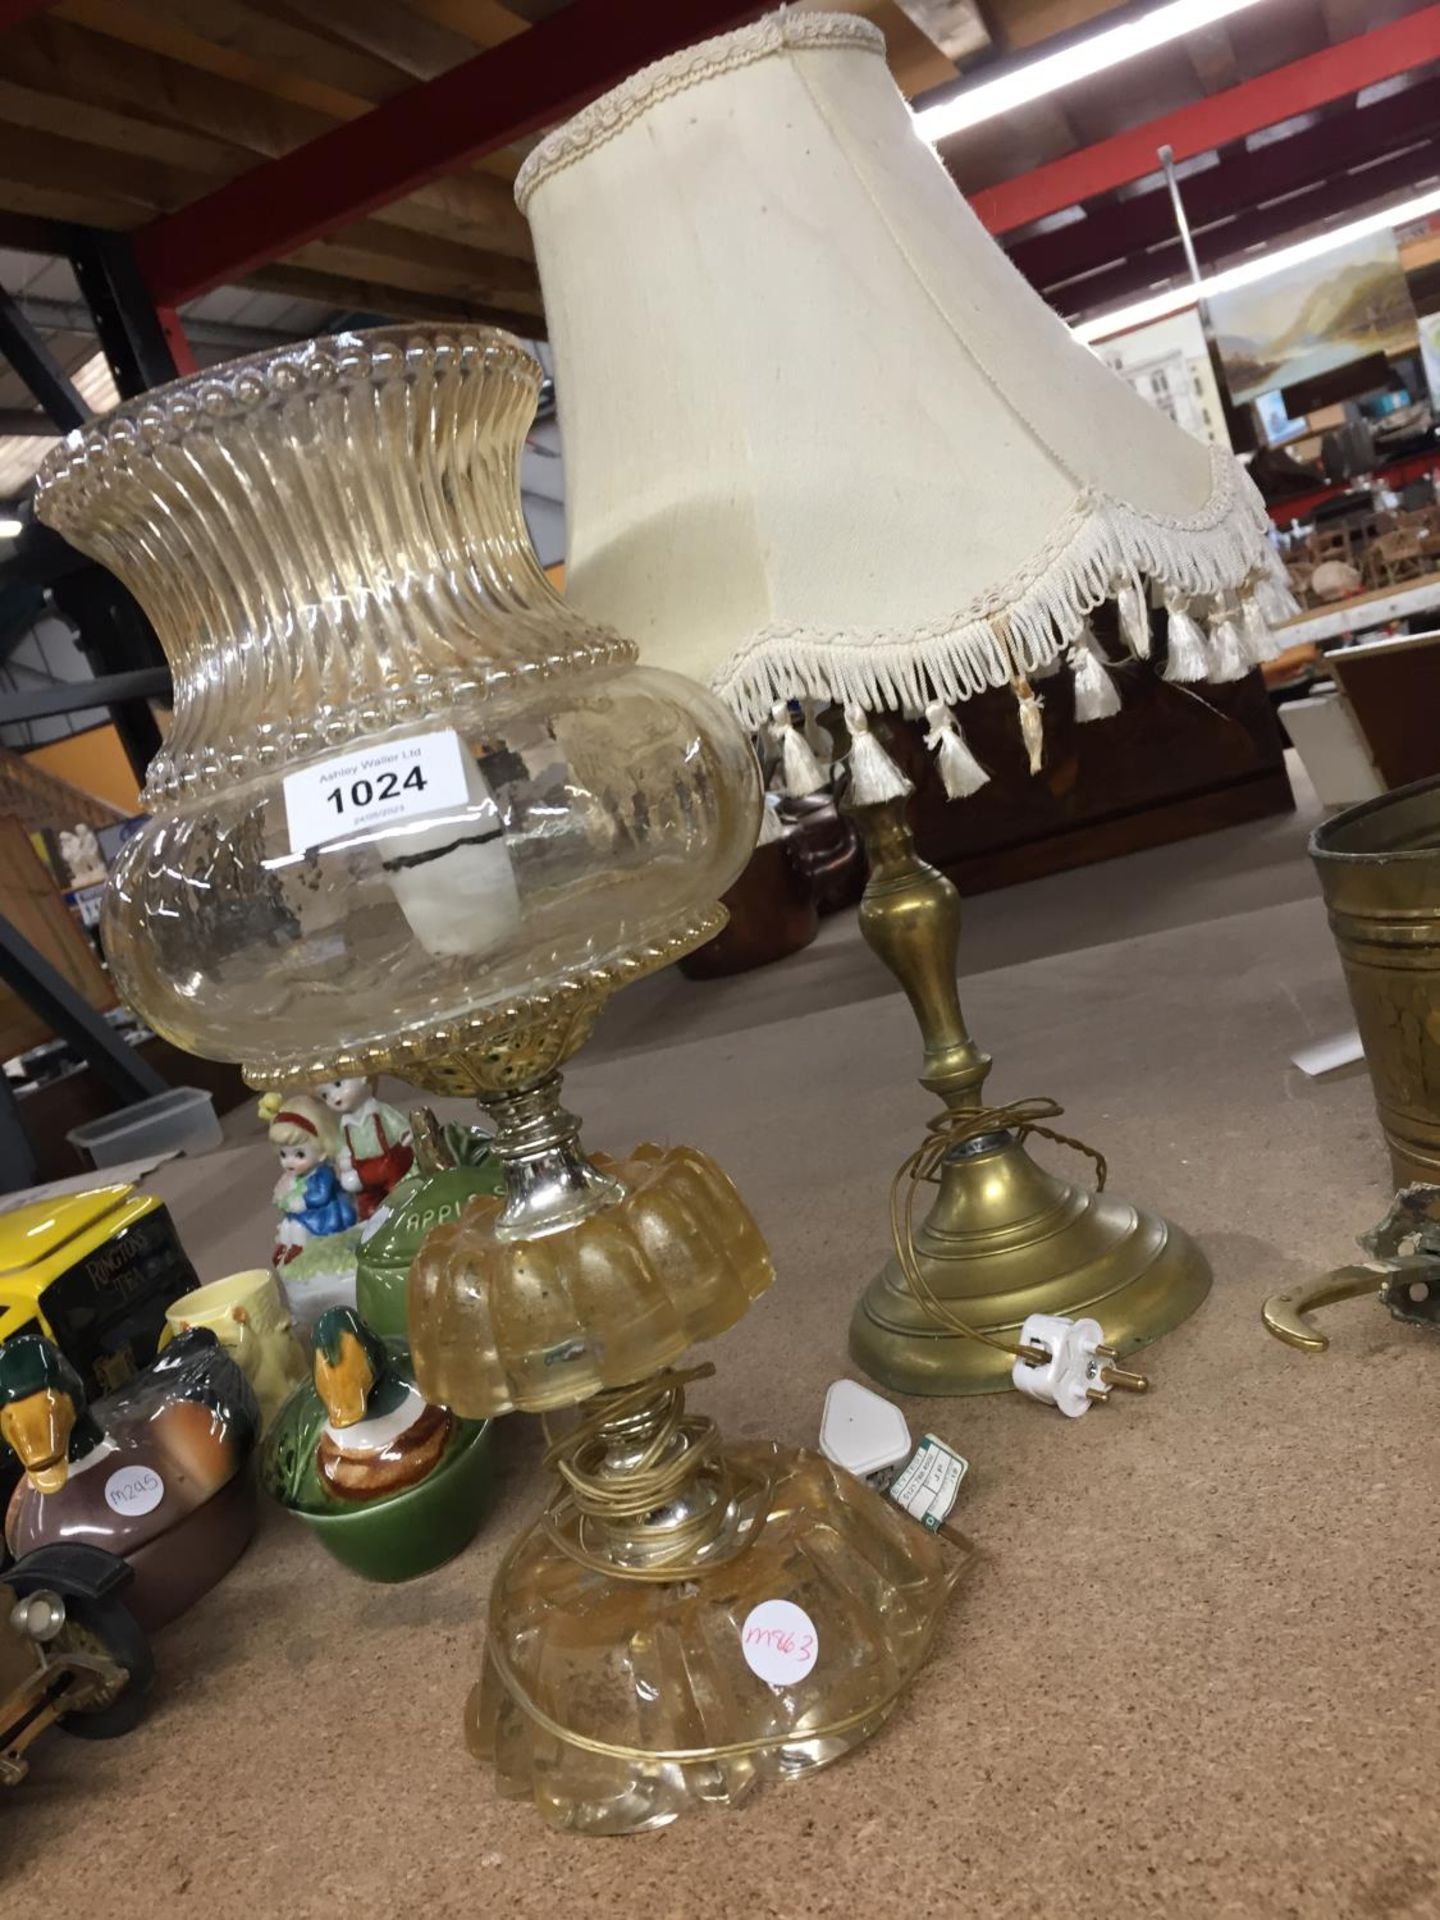 TWO TABLE LAMPS, ONE BRASS, THE OTHER IN THE STYLE OF AN OIL LAMP